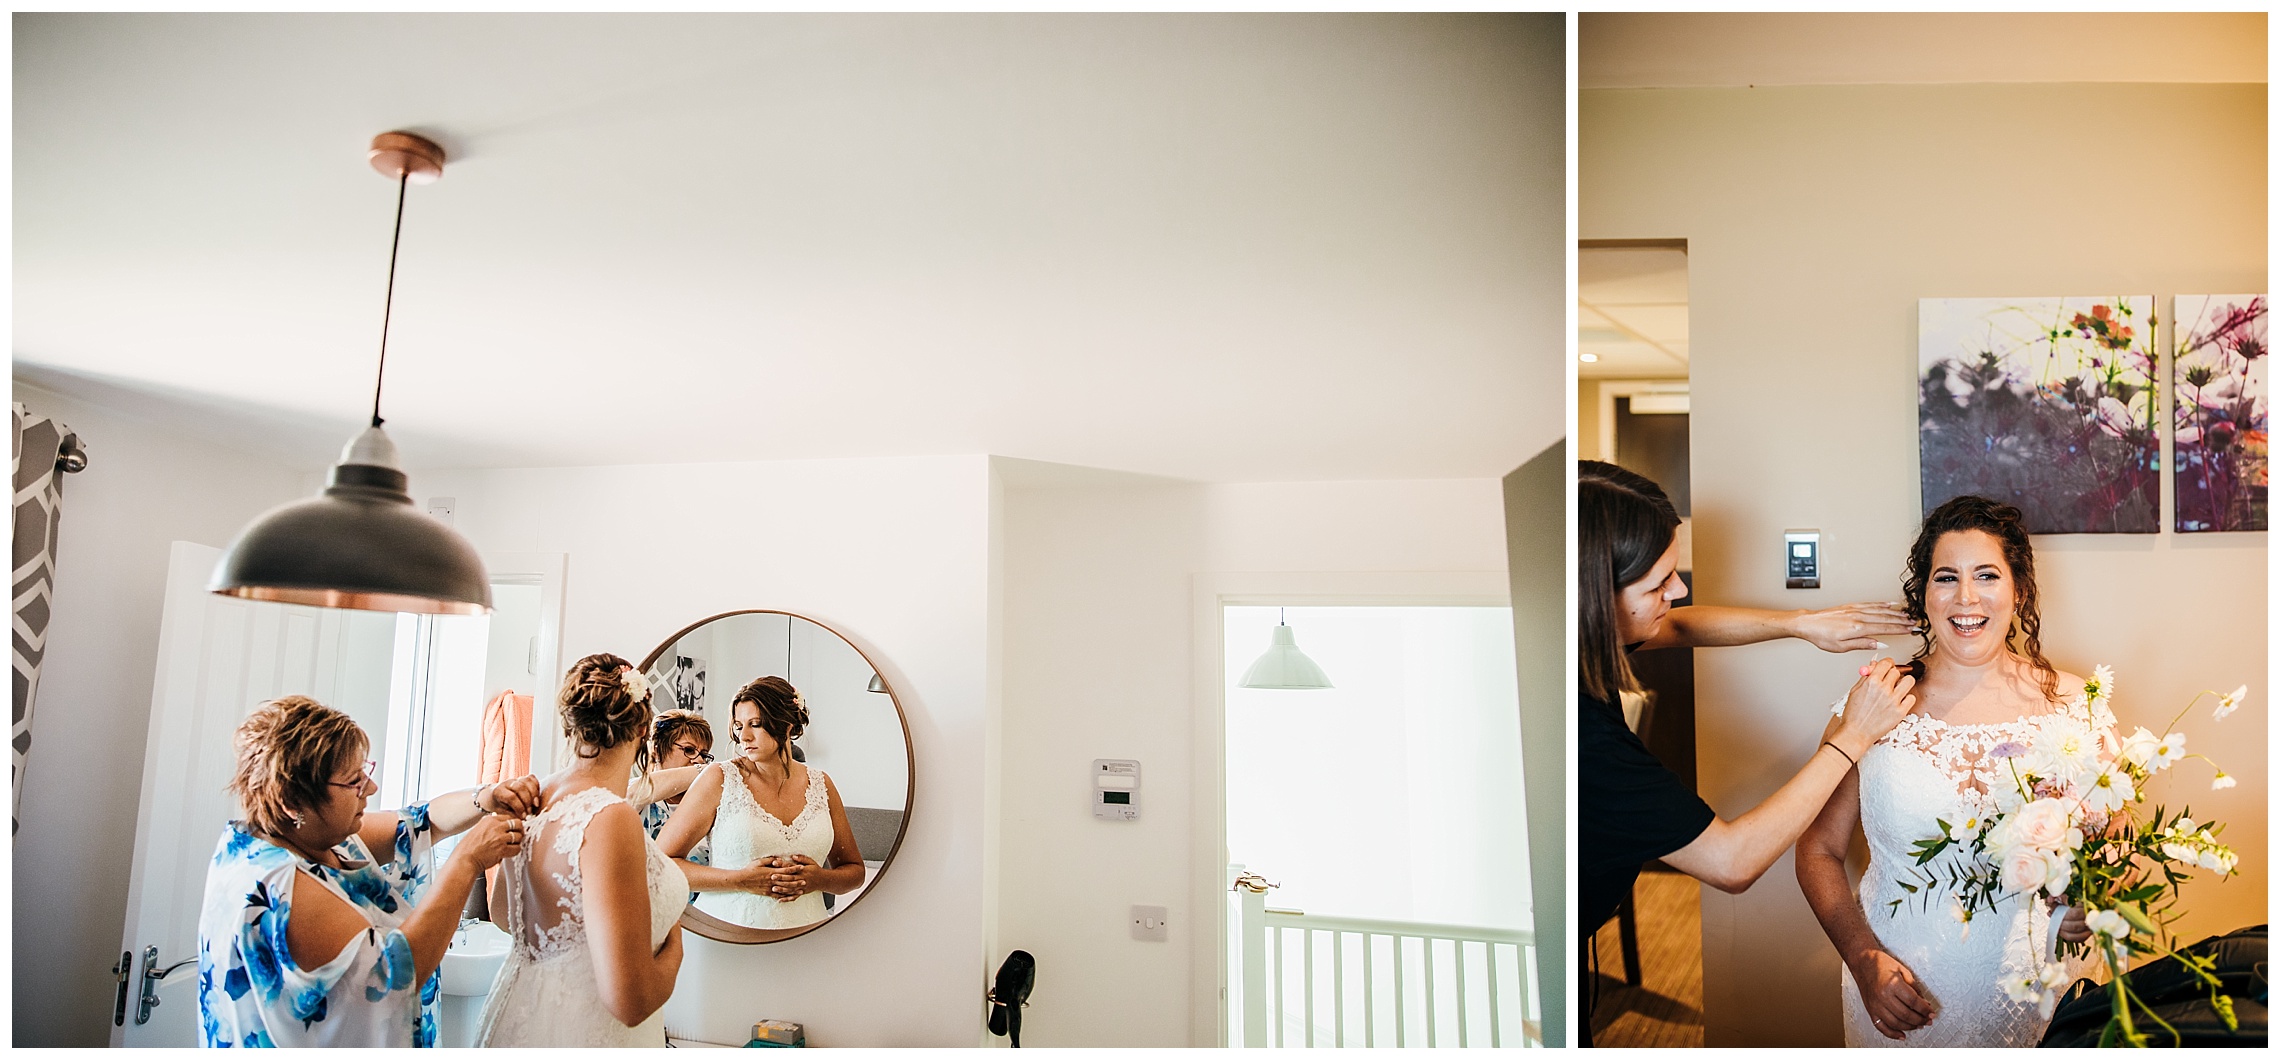 brides getting ready in white rooms